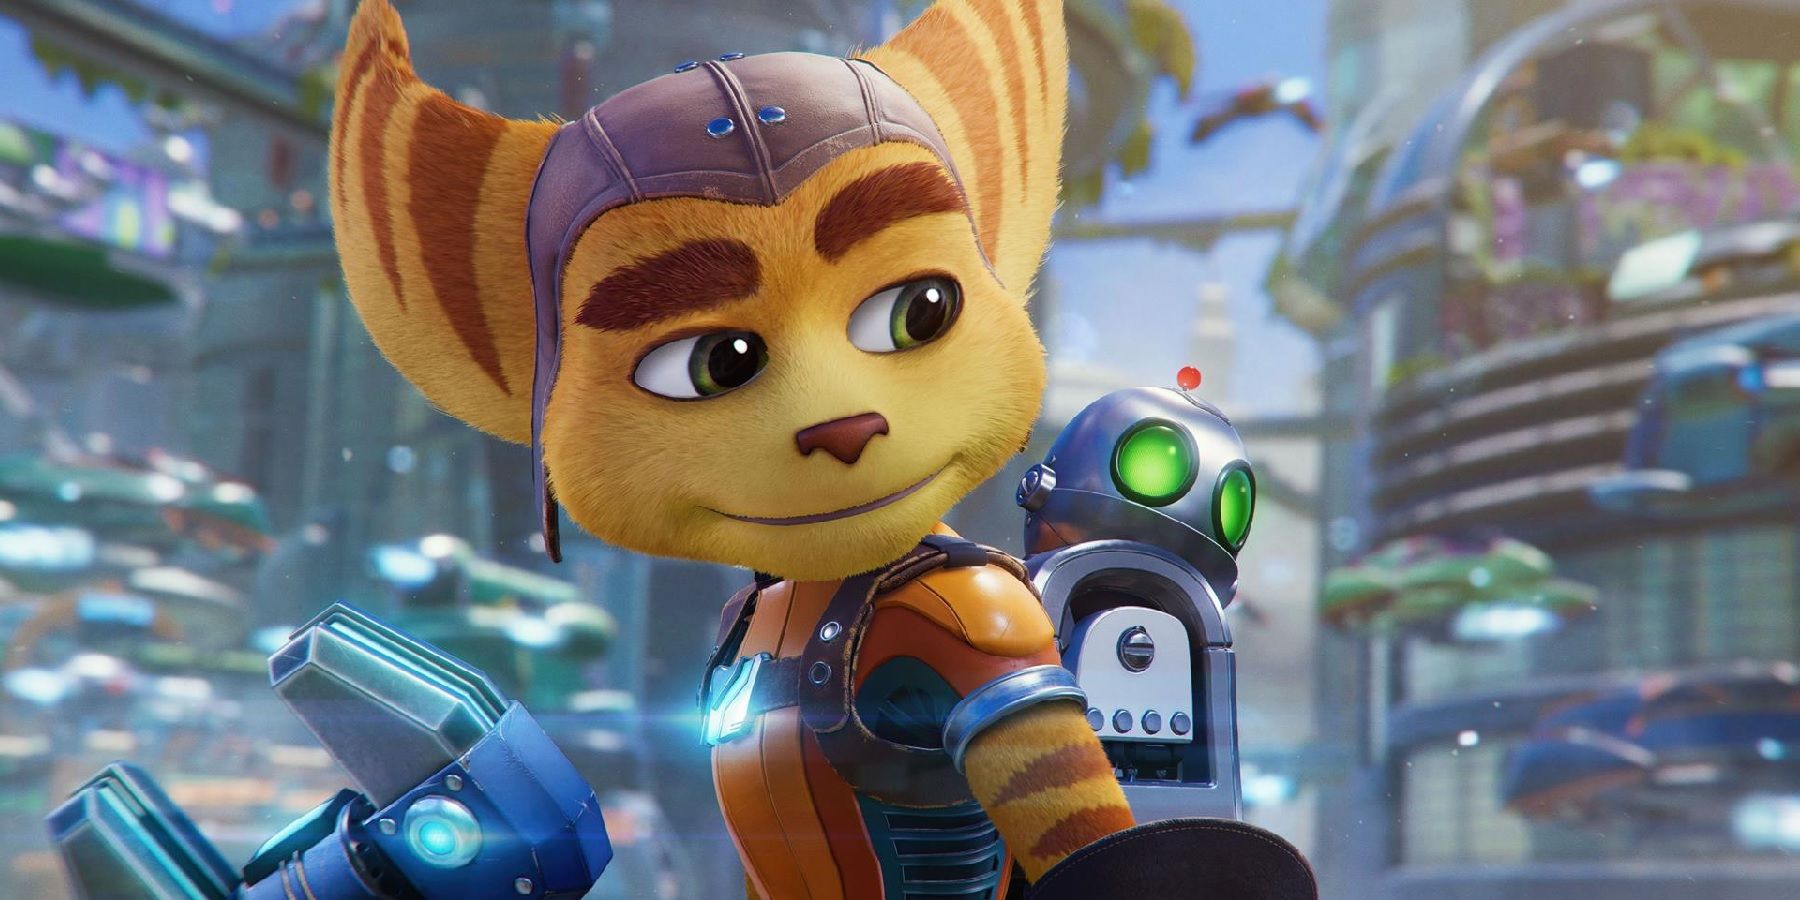 Ratchet and Clank together in Rift Apart